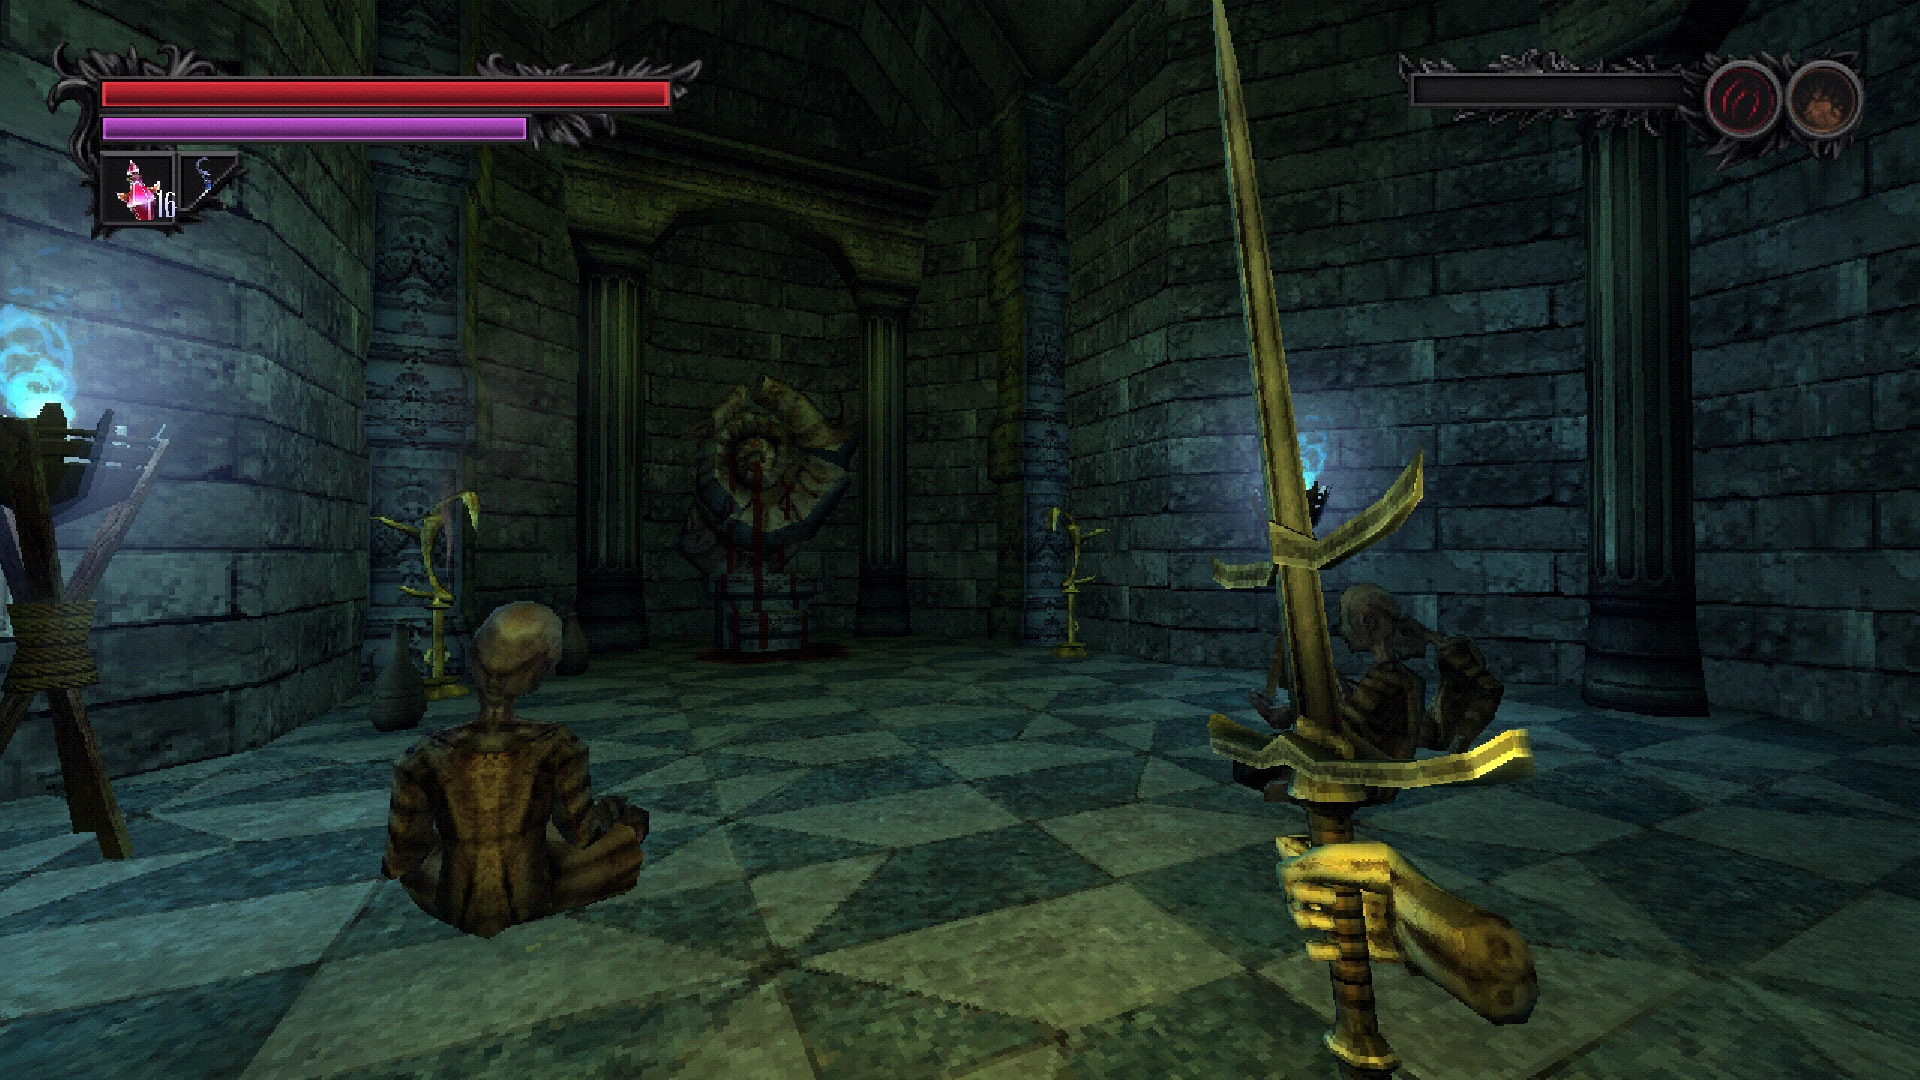 An image of the player observing an ominous gathering of corpses seated around a desecrated monument.